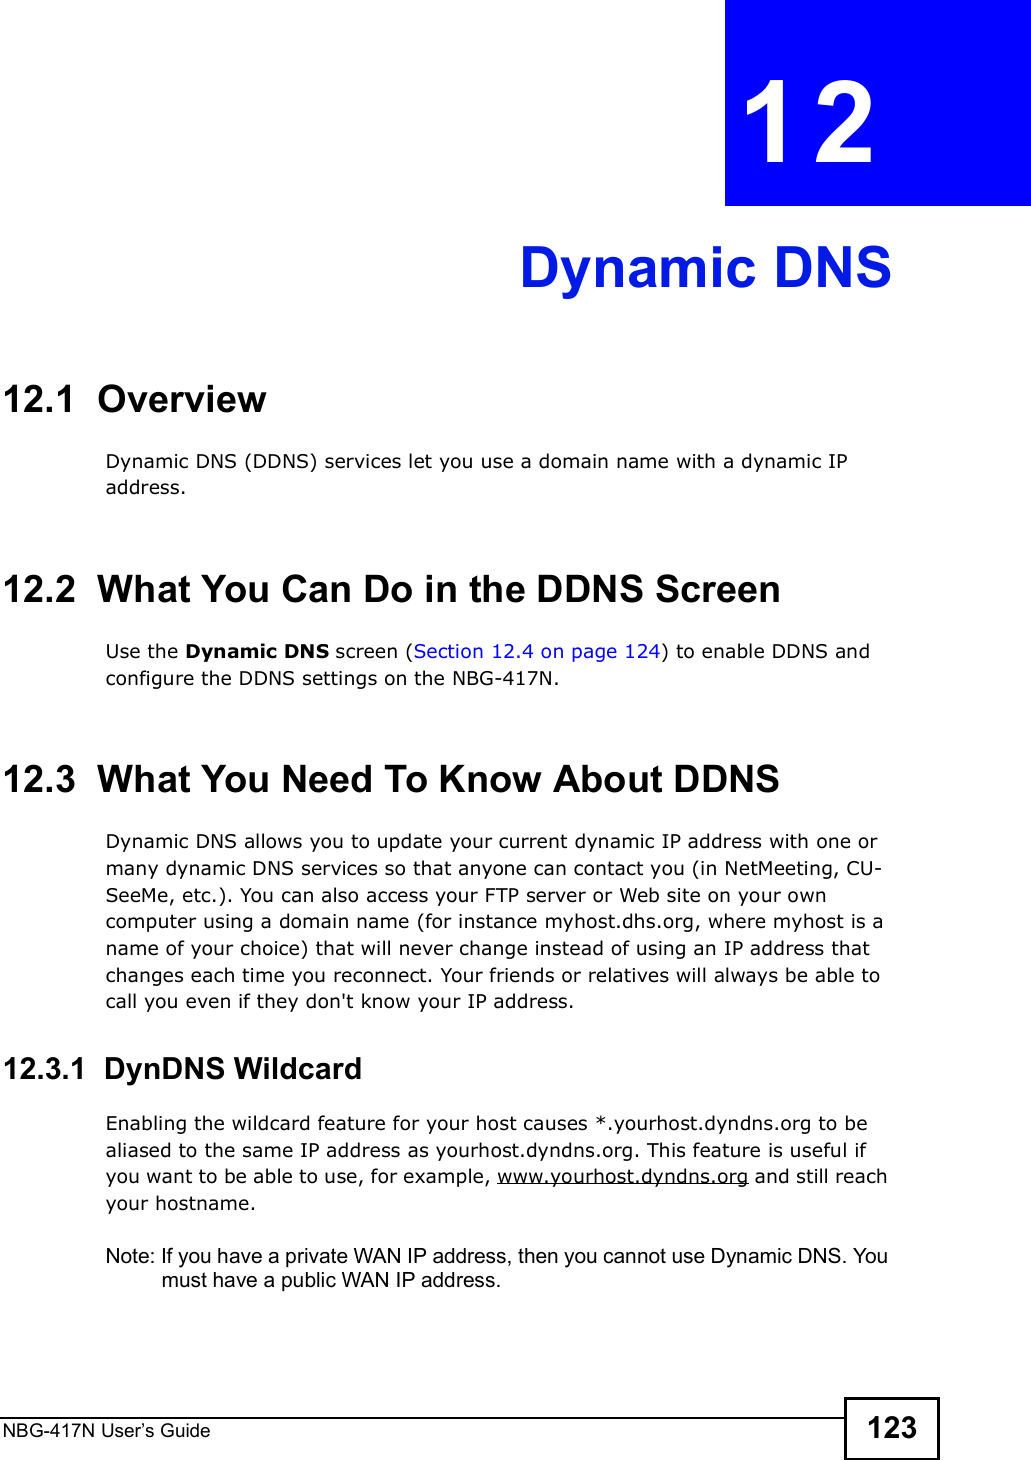 NBG-417N User s Guide 123CHAPTER  12 Dynamic DNS12.1  Overview Dynamic DNS (DDNS) services let you use a domain name with a dynamic IP address.12.2  What You Can Do in the DDNS ScreenUse the Dynamic DNS screen (Section 12.4 on page 124) to enable DDNS and configure the DDNS settings on the NBG-417N.12.3  What You Need To Know About DDNSDynamic DNS allows you to update your current dynamic IP address with one or many dynamic DNS services so that anyone can contact you (in NetMeeting, CU-SeeMe, etc.). You can also access your FTP server or Web site on your own computer using a domain name (for instance myhost.dhs.org, where myhost is a name of your choice) that will never change instead of using an IP address that changes each time you reconnect. Your friends or relatives will always be able to call you even if they don&apos;t know your IP address.12.3.1  DynDNS Wildcard Enabling the wildcard feature for your host causes *.yourhost.dyndns.org to be aliased to the same IP address as yourhost.dyndns.org. This feature is useful if you want to be able to use, for example, www.yourhost.dyndns.org and still reach your hostname.Note: If you have a private WAN IP address, then you cannot use Dynamic DNS. You must have a public WAN IP address.